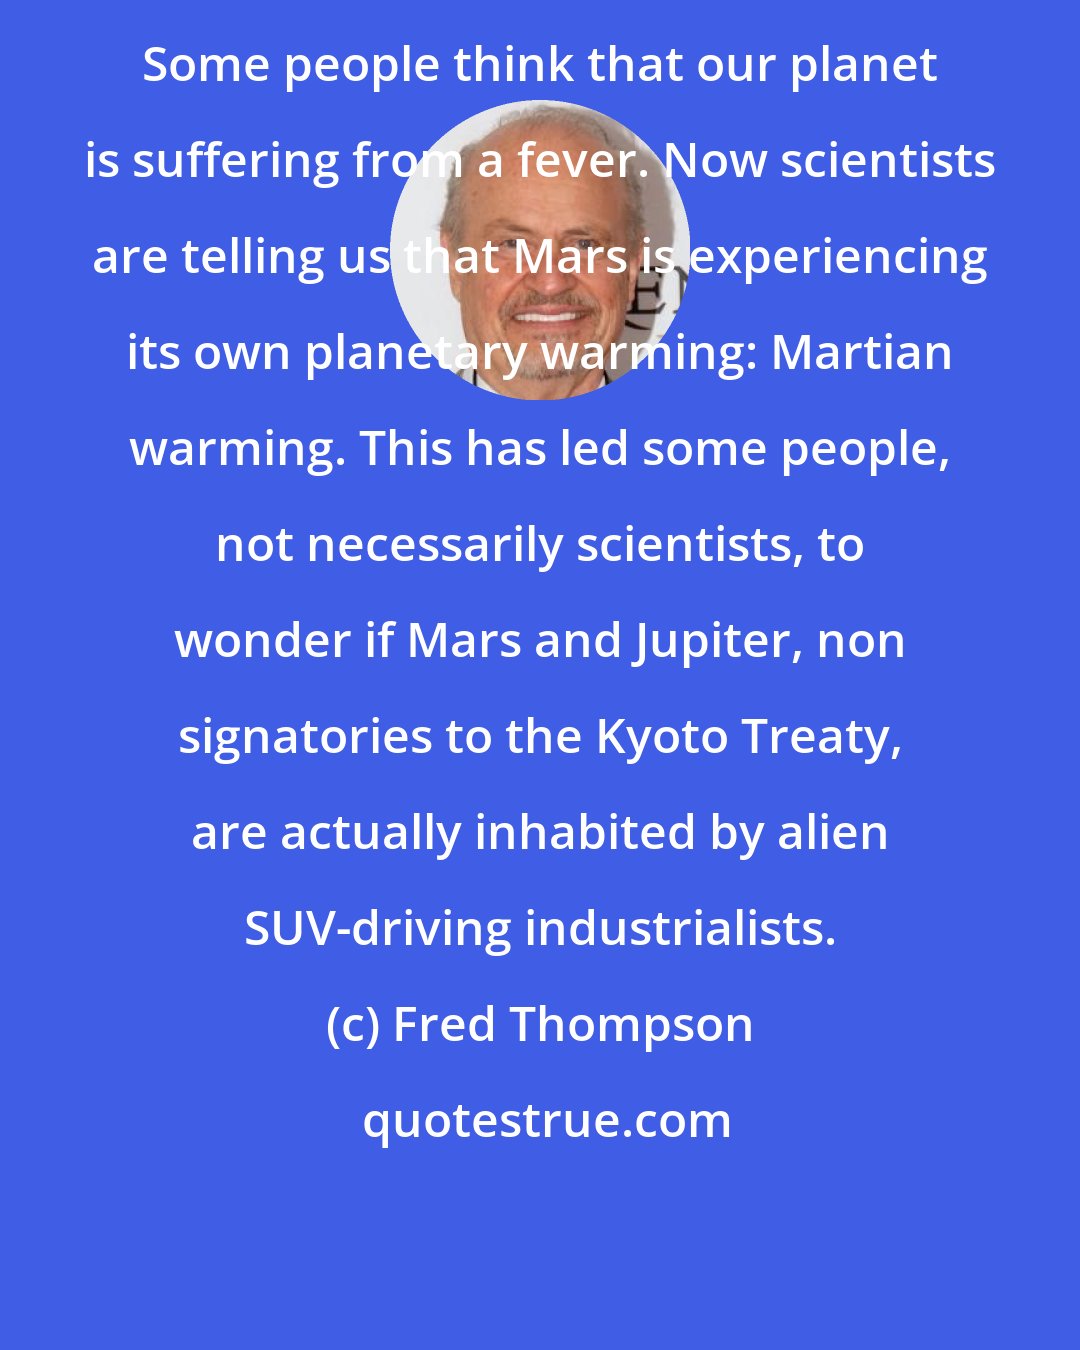 Fred Thompson: Some people think that our planet is suffering from a fever. Now scientists are telling us that Mars is experiencing its own planetary warming: Martian warming. This has led some people, not necessarily scientists, to wonder if Mars and Jupiter, non signatories to the Kyoto Treaty, are actually inhabited by alien SUV-driving industrialists.